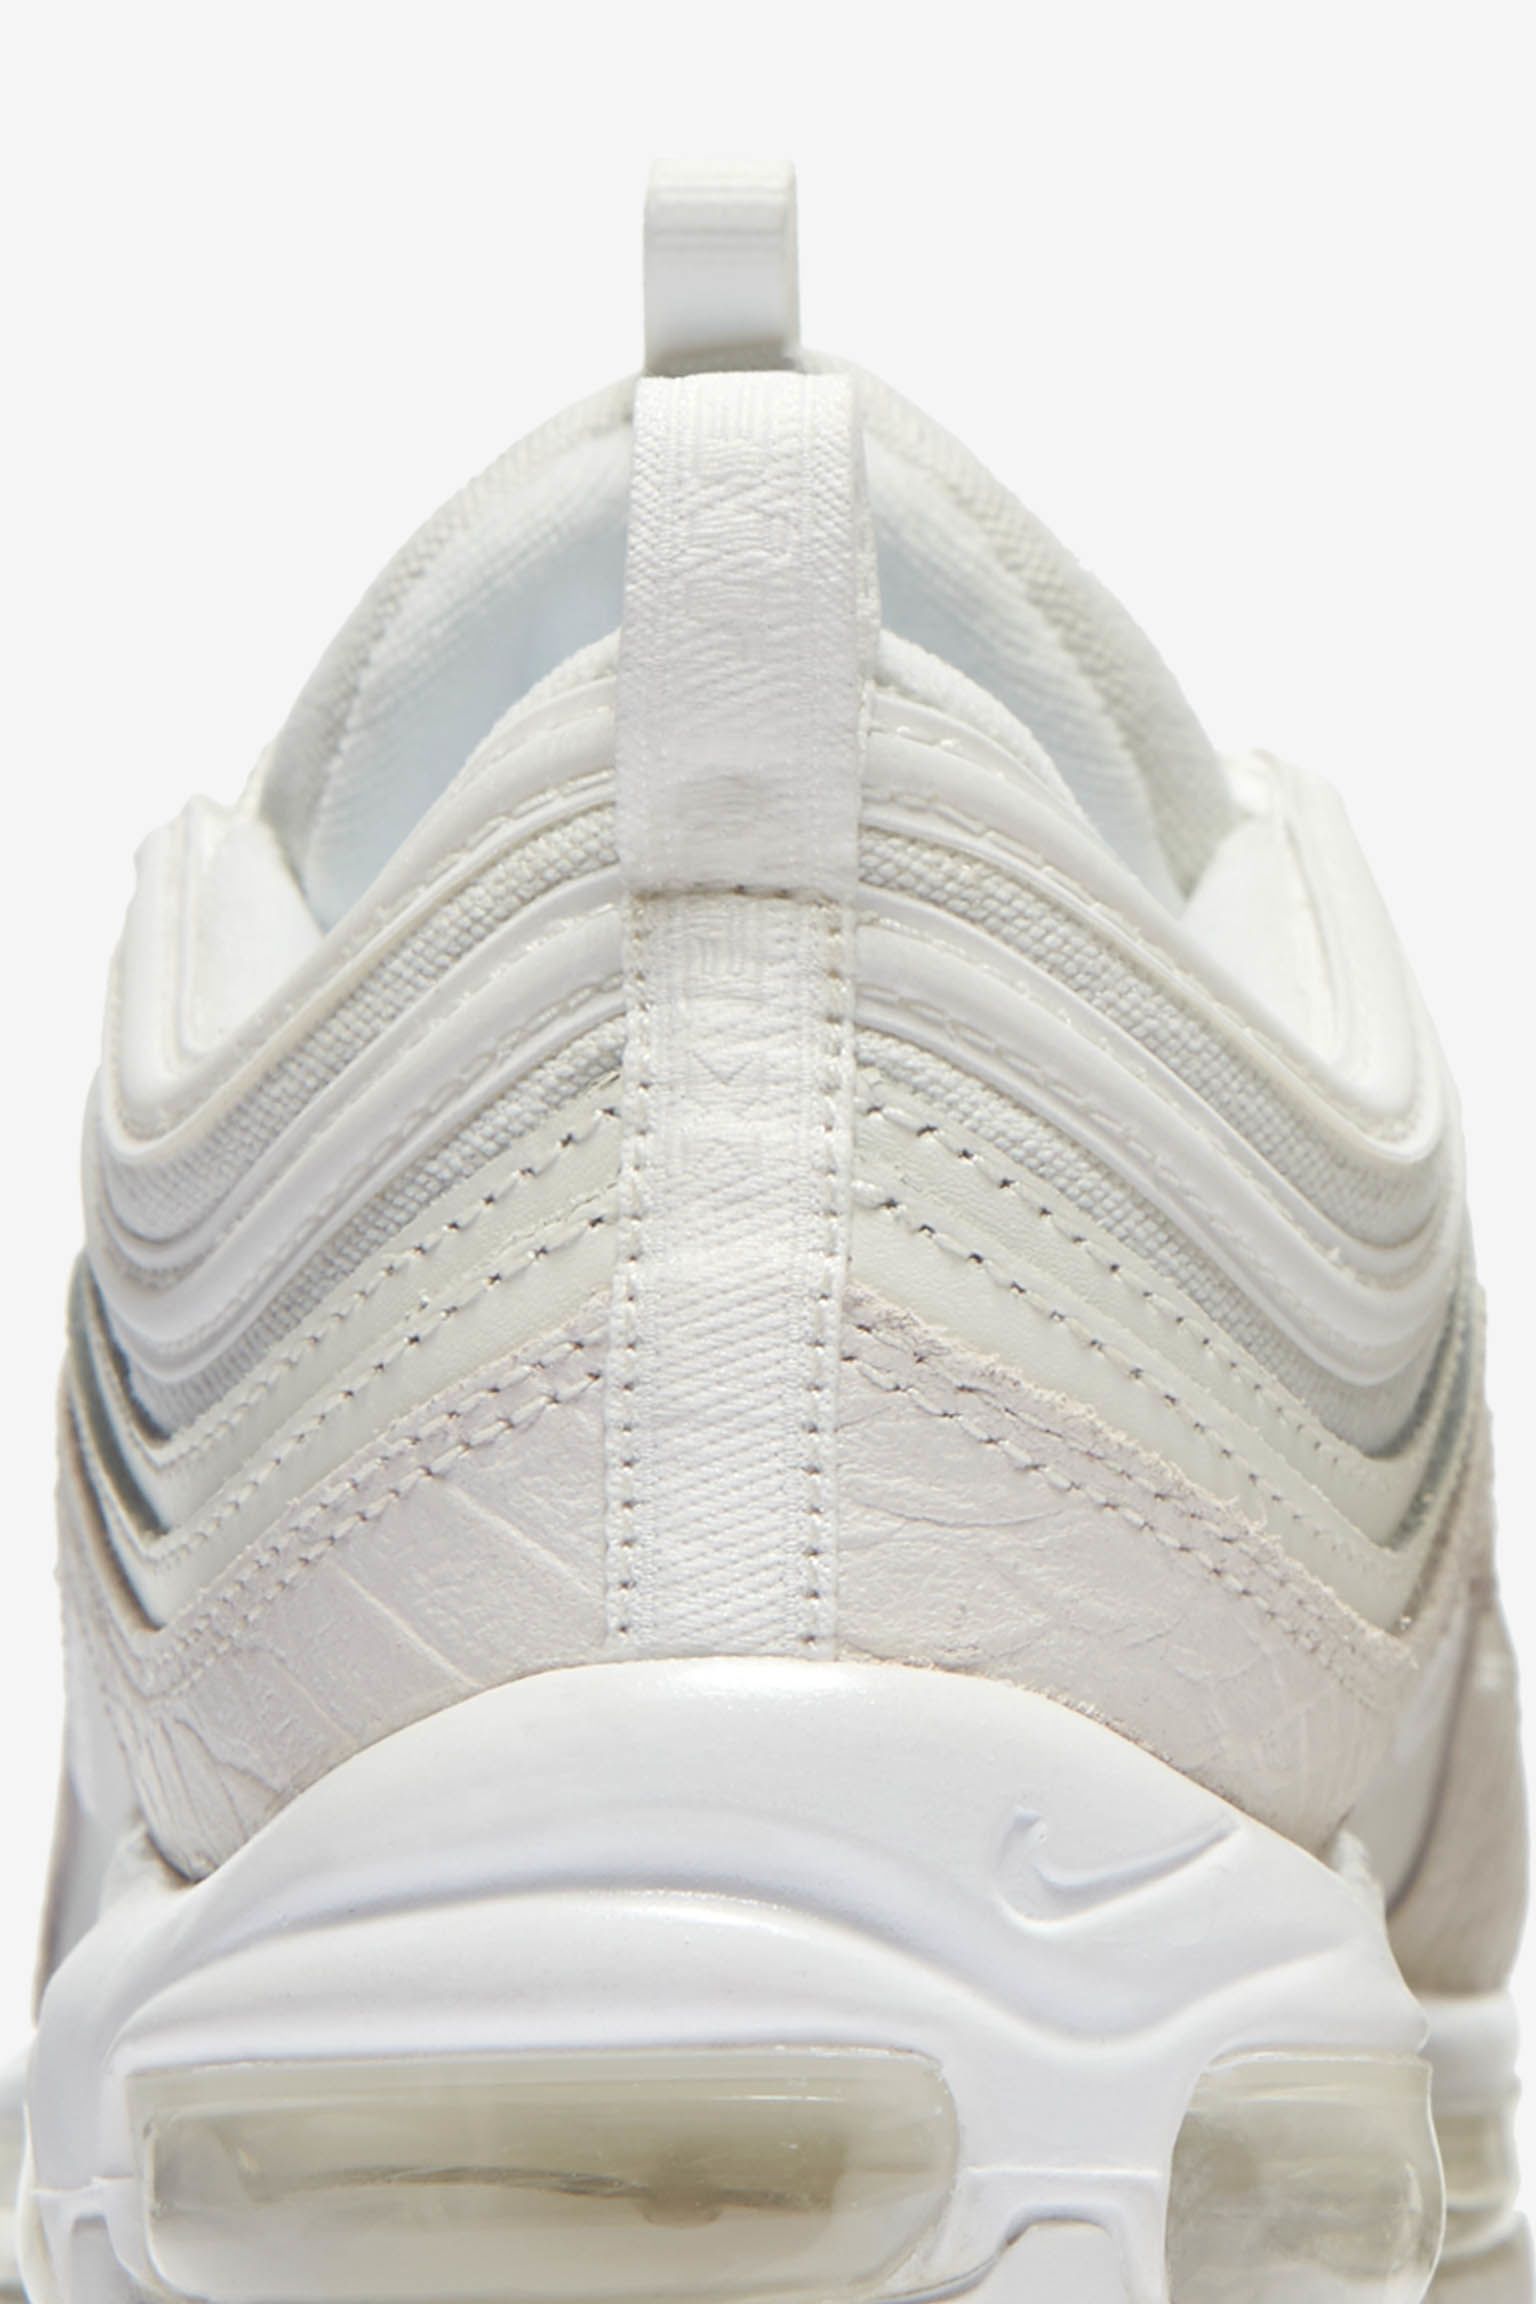 air max 97 white snakeskin release date